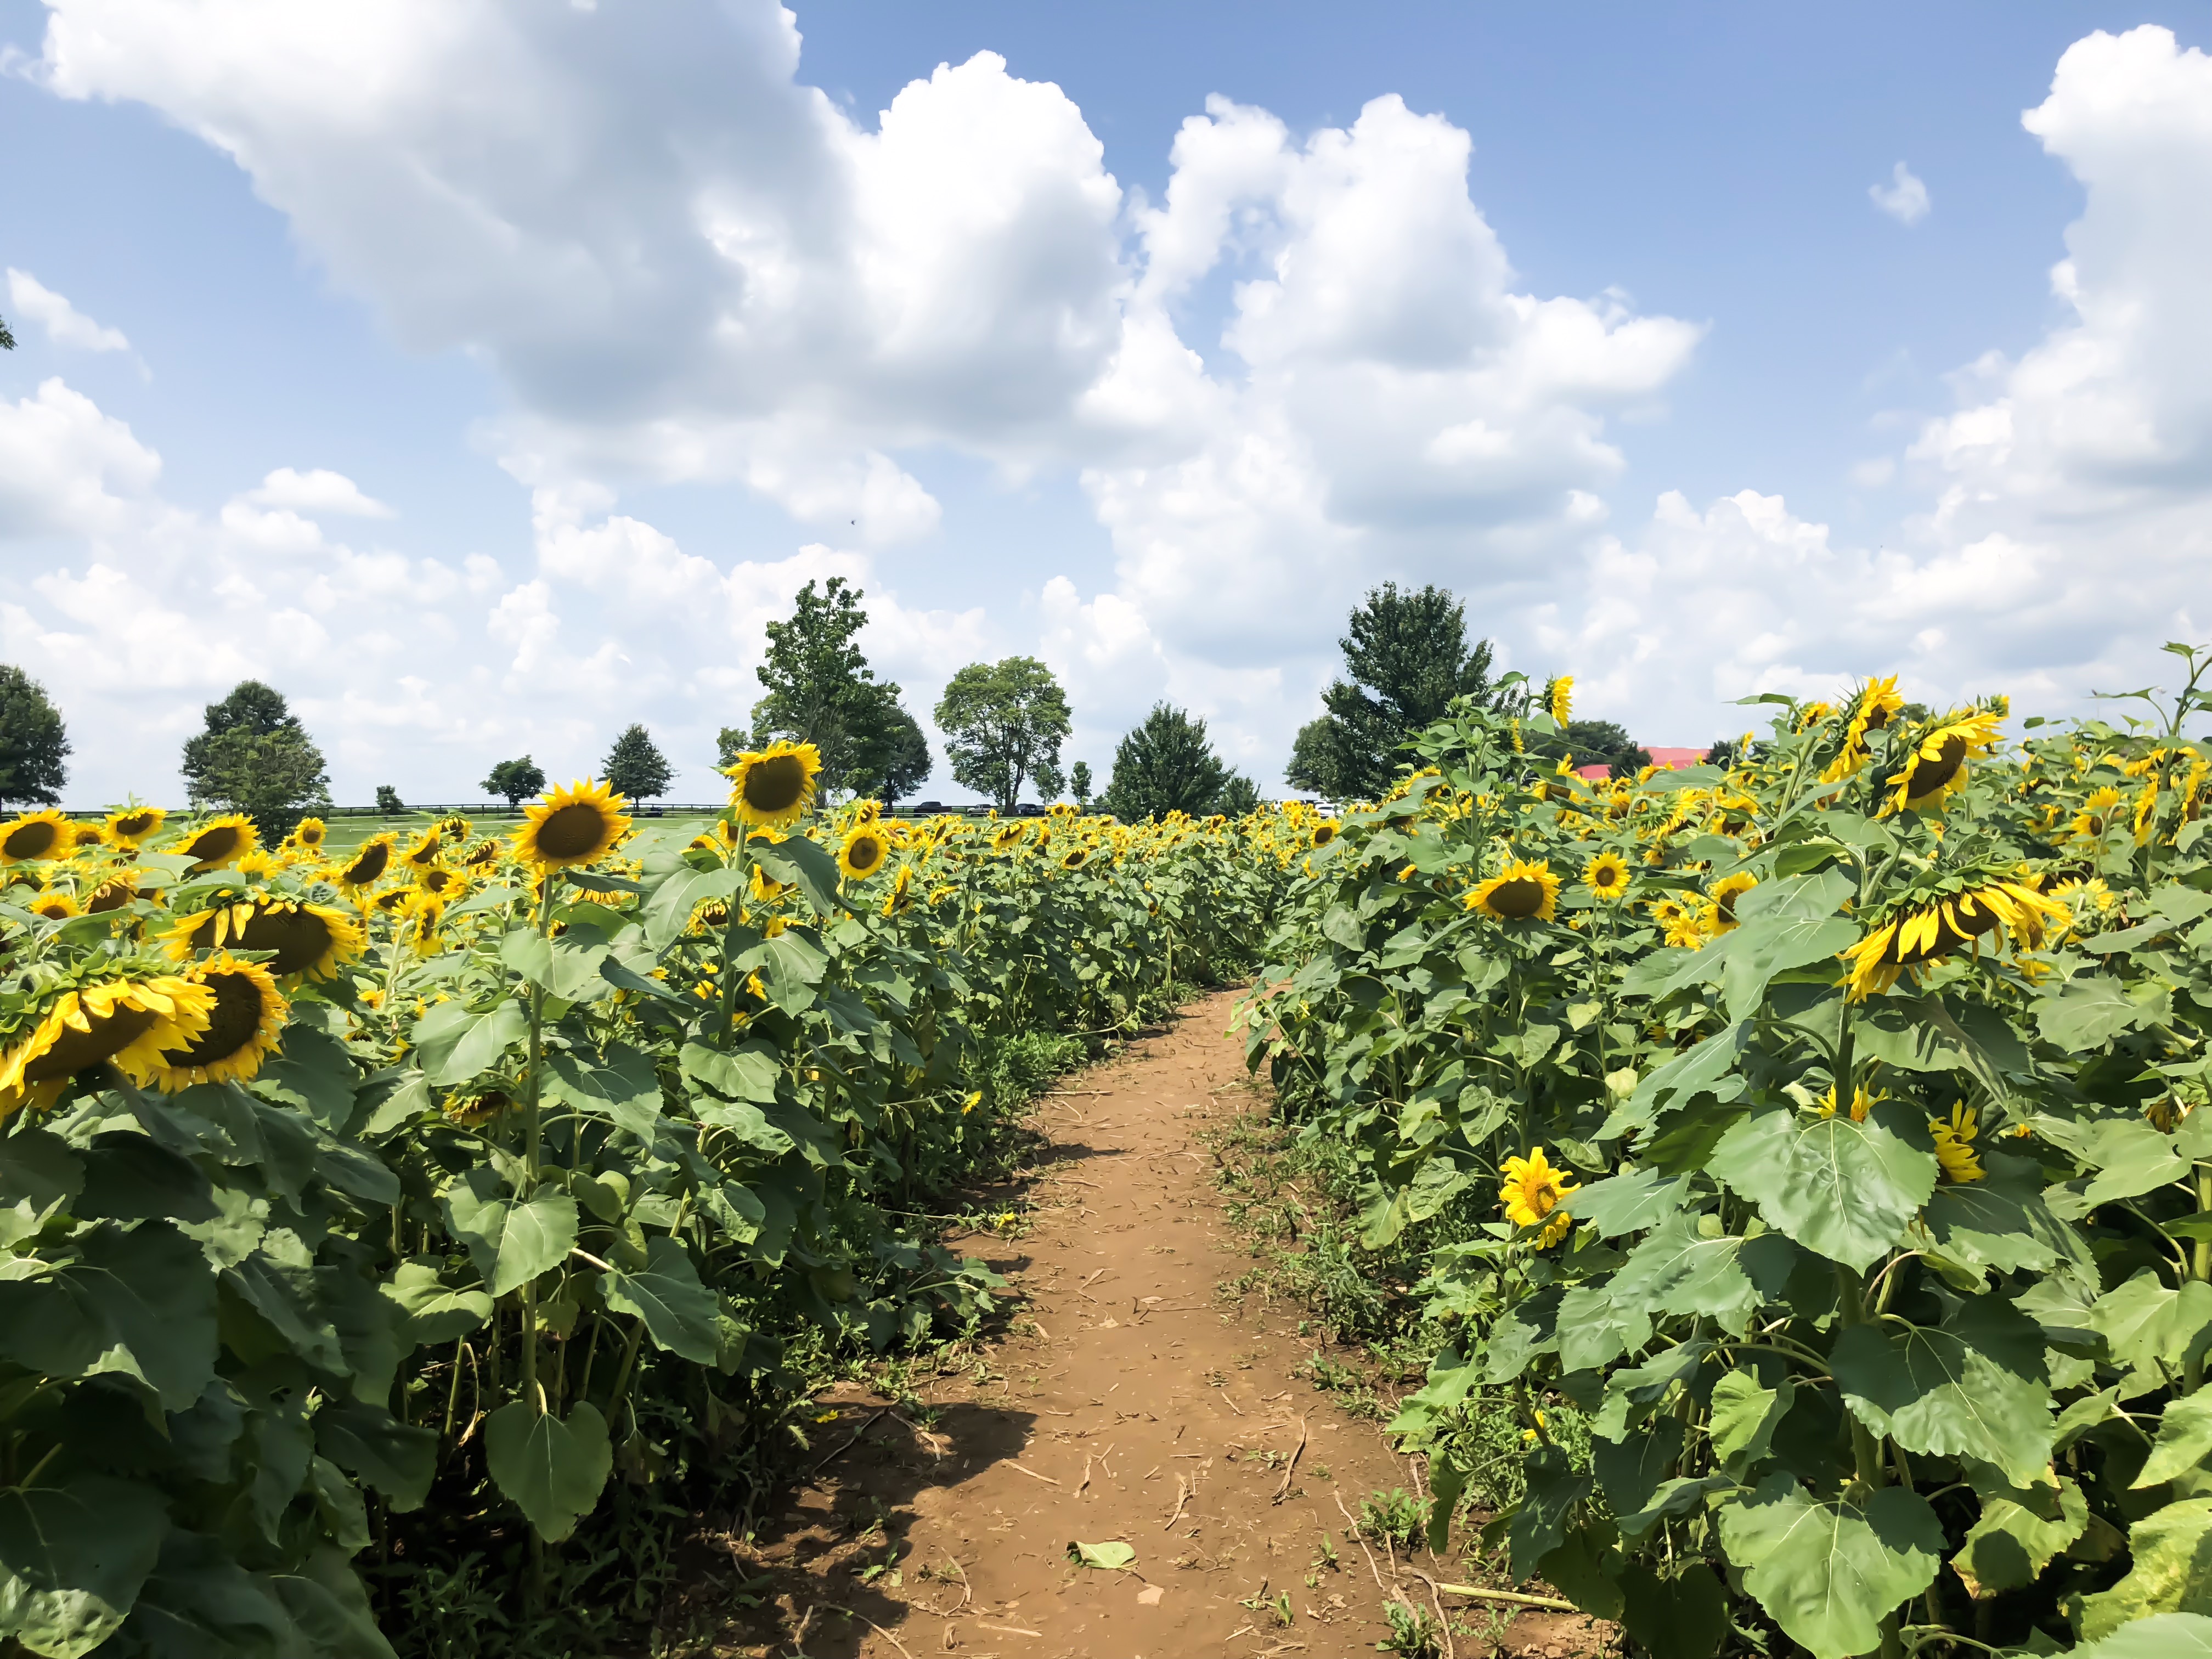 It's the beginning of August and summer is slowly coming to an end. Before we know it, it will be fall, which is my favorite season! However, there are still a couple of weeks left before it's officially fall, so we might as well take advantage of what summer has to offer, while we can! #visitlex #kentucky #sunflowers #summer #celebrate #list #lexingtonky #outdoors #nature